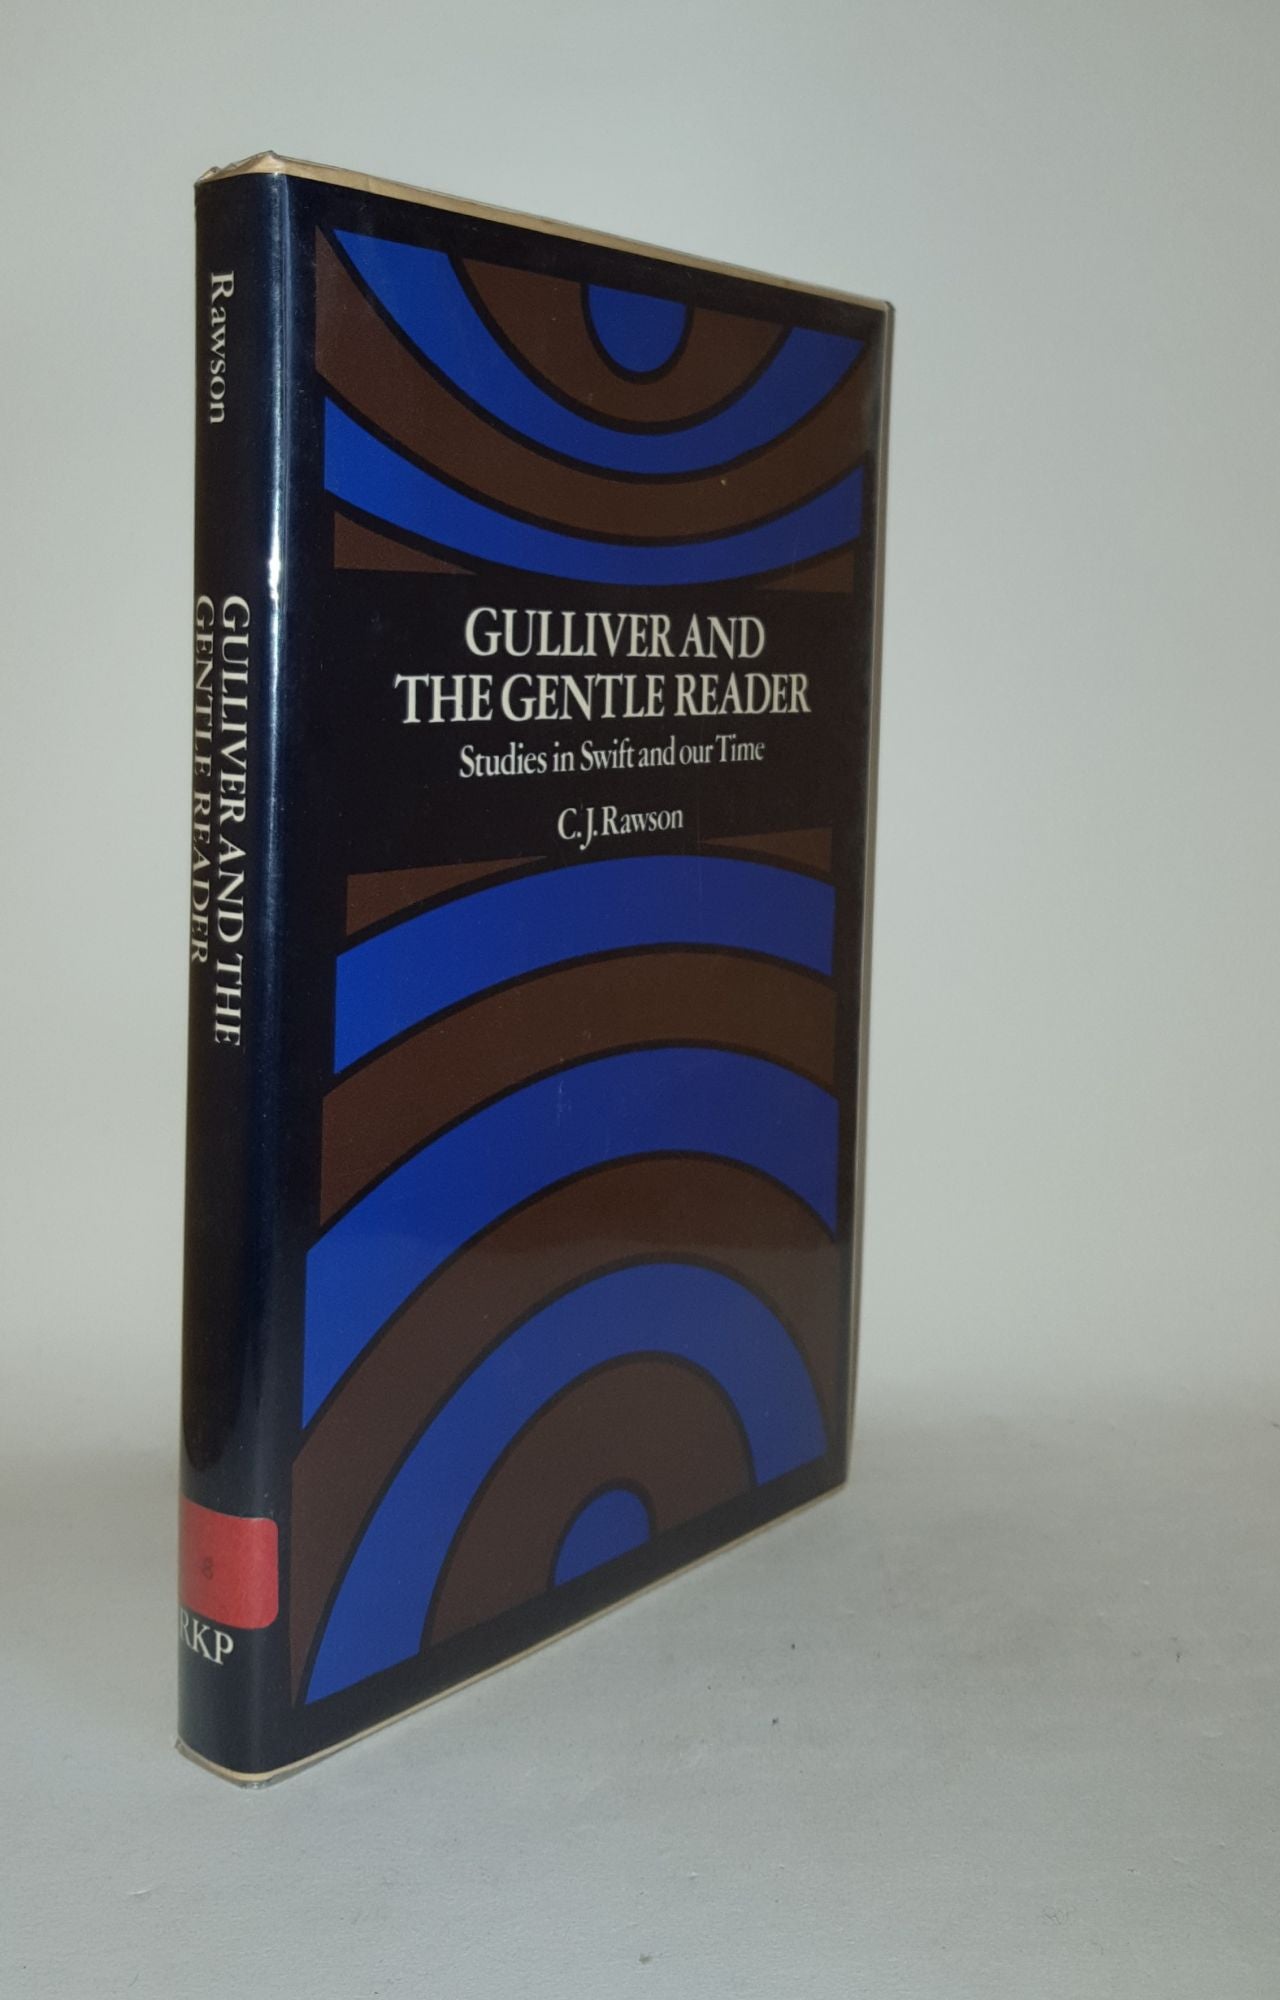 RAWSON C.J. - Gulliver and the Gentle Reader Studies in Swift and Our Time